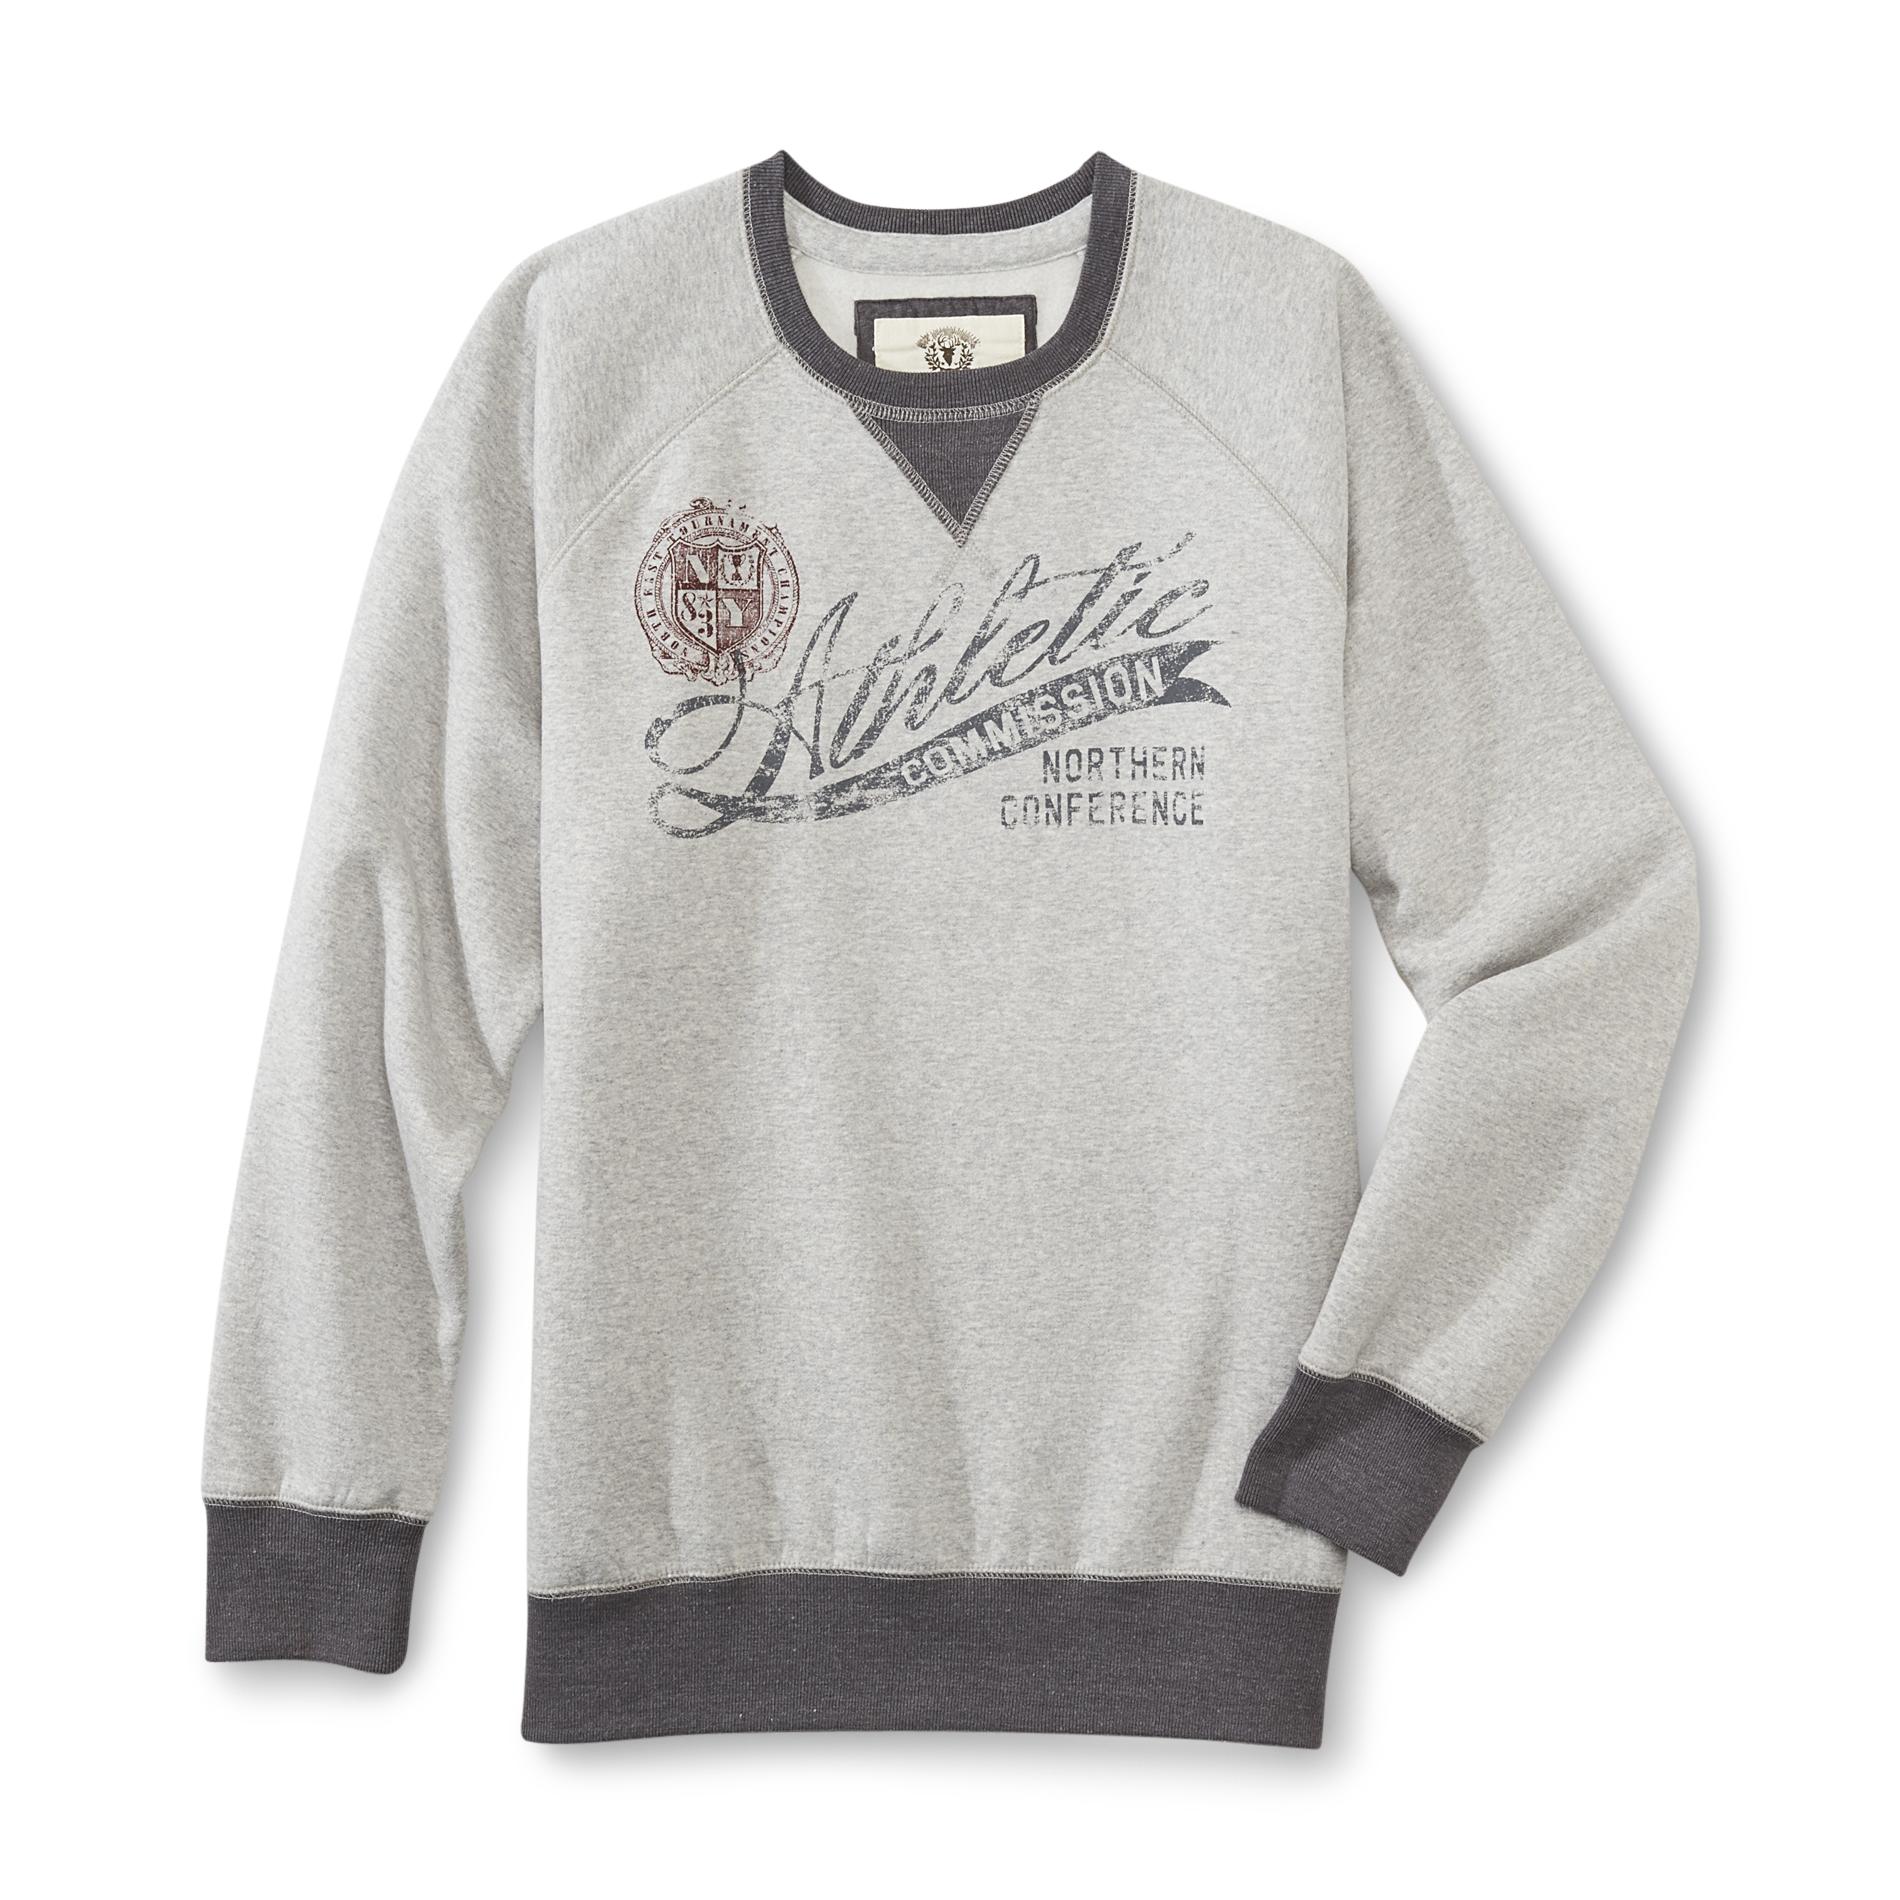 Roebuck & Co. Young Men's Raglan Sweater - Athletic Commission